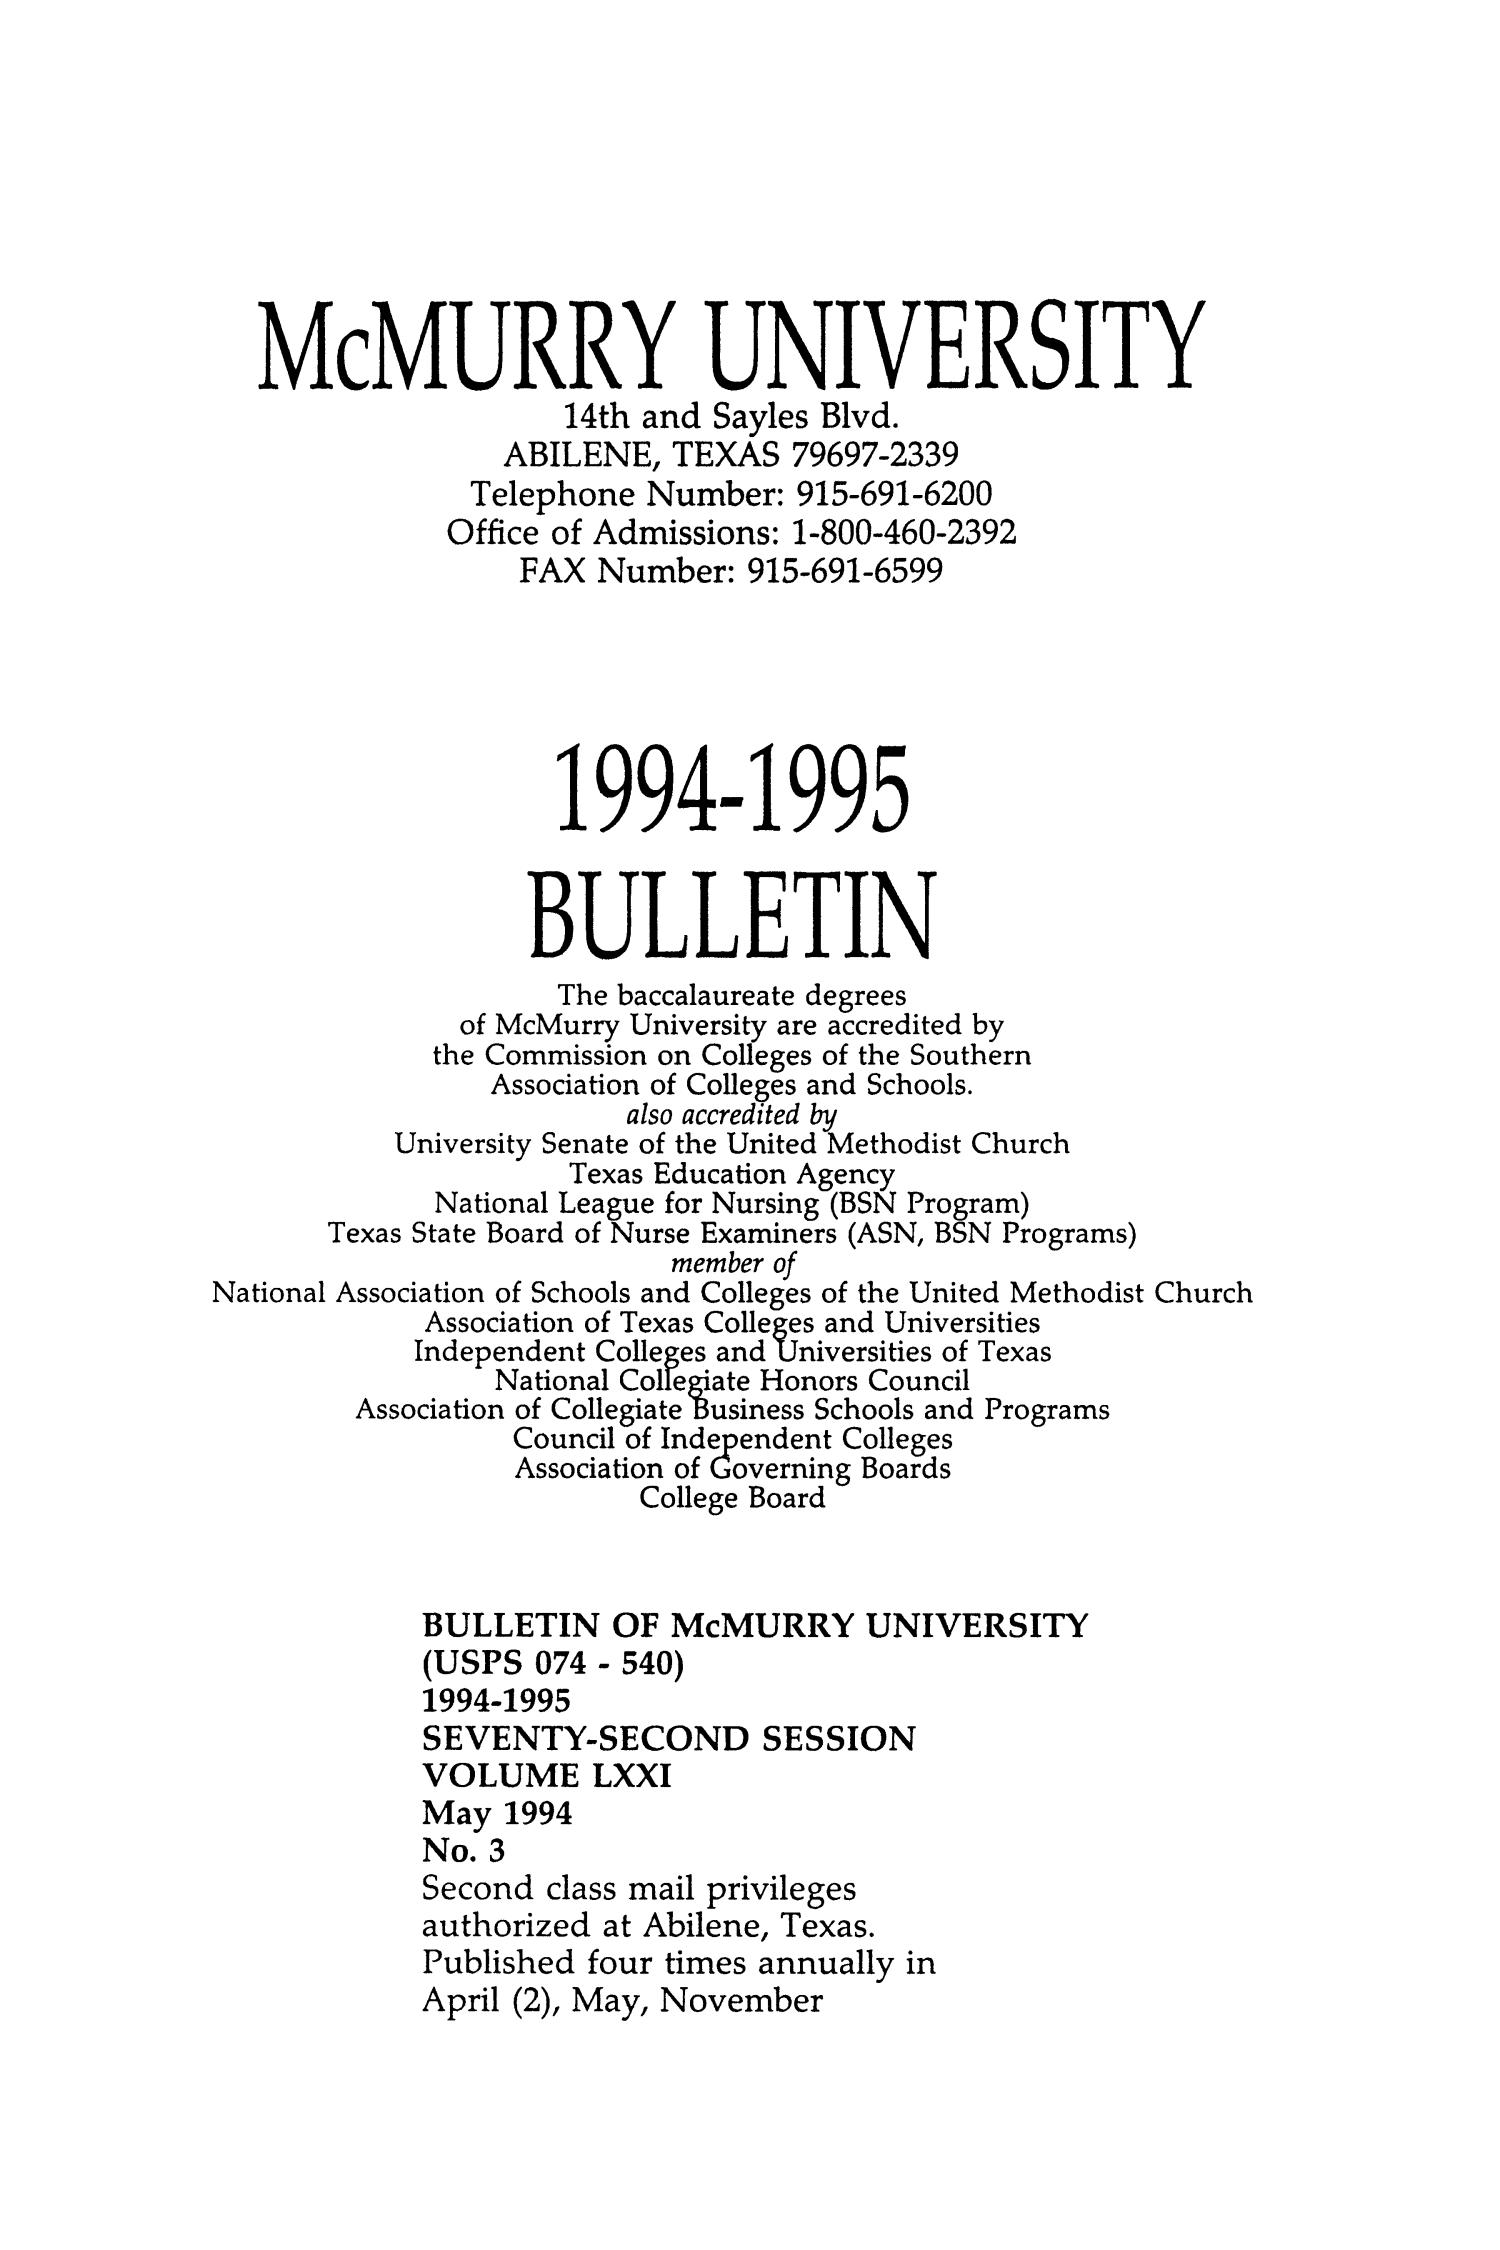 Bulletin of McMurry University, 1994-1995
                                                
                                                    [Sequence #]: 3 of 264
                                                